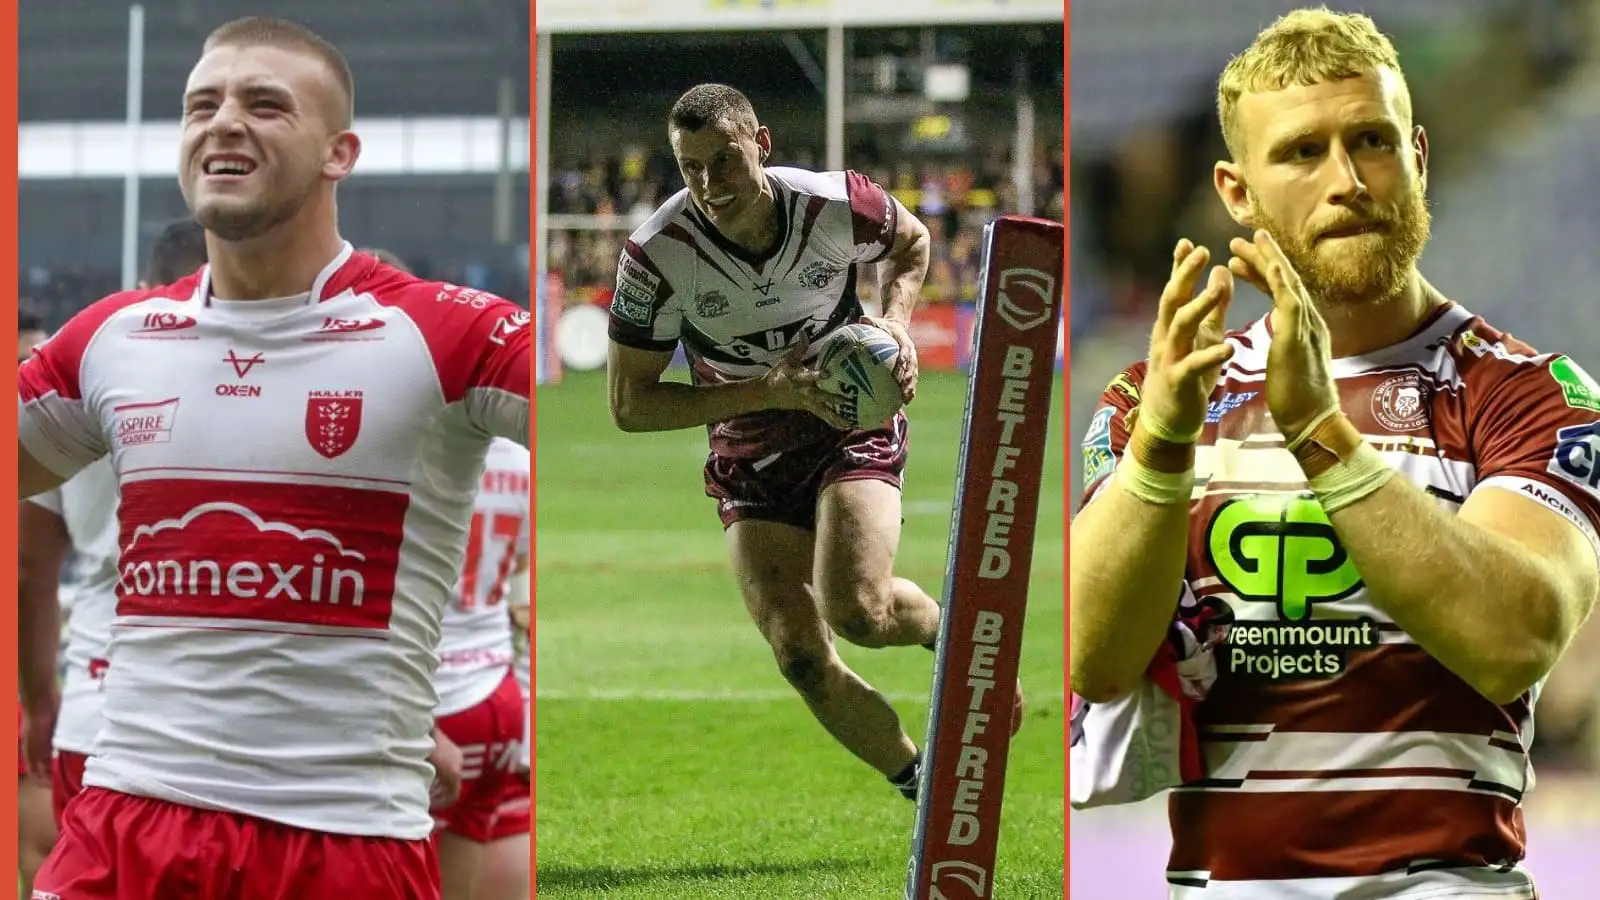 Super League Team of the Week: Eight clubs represented including Wigan Warriors, Castleford Tigers